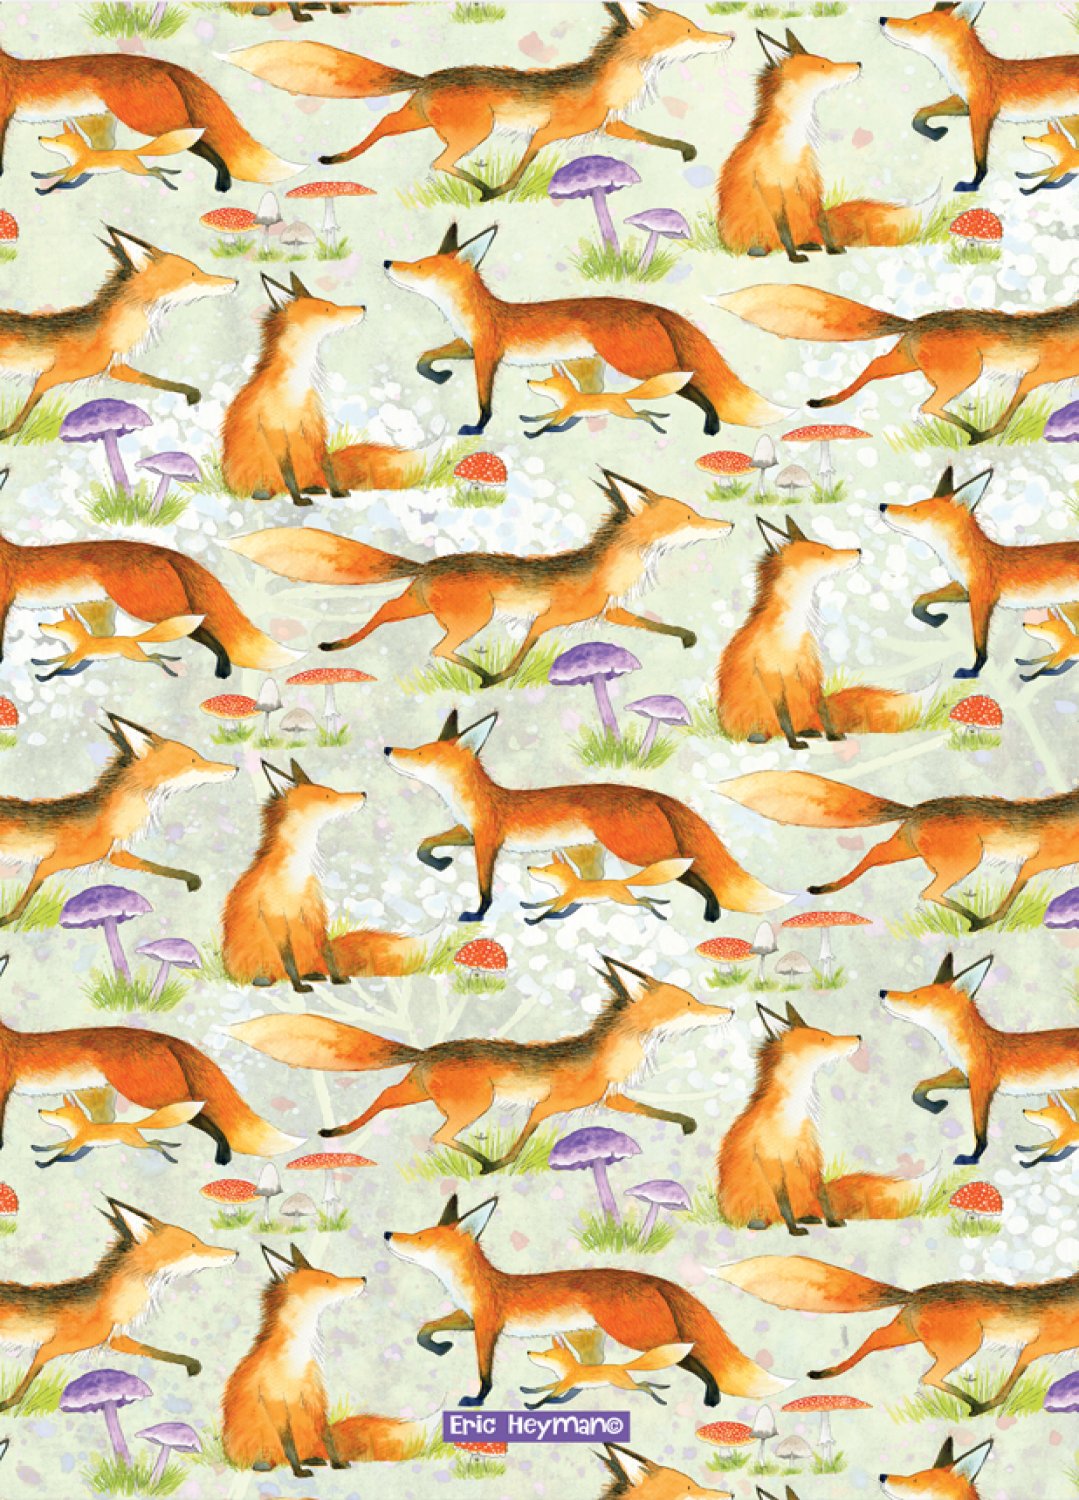 Emma Ball "Eric Heyman Foxes", Pure cotton tea towel. Printed in the UK.